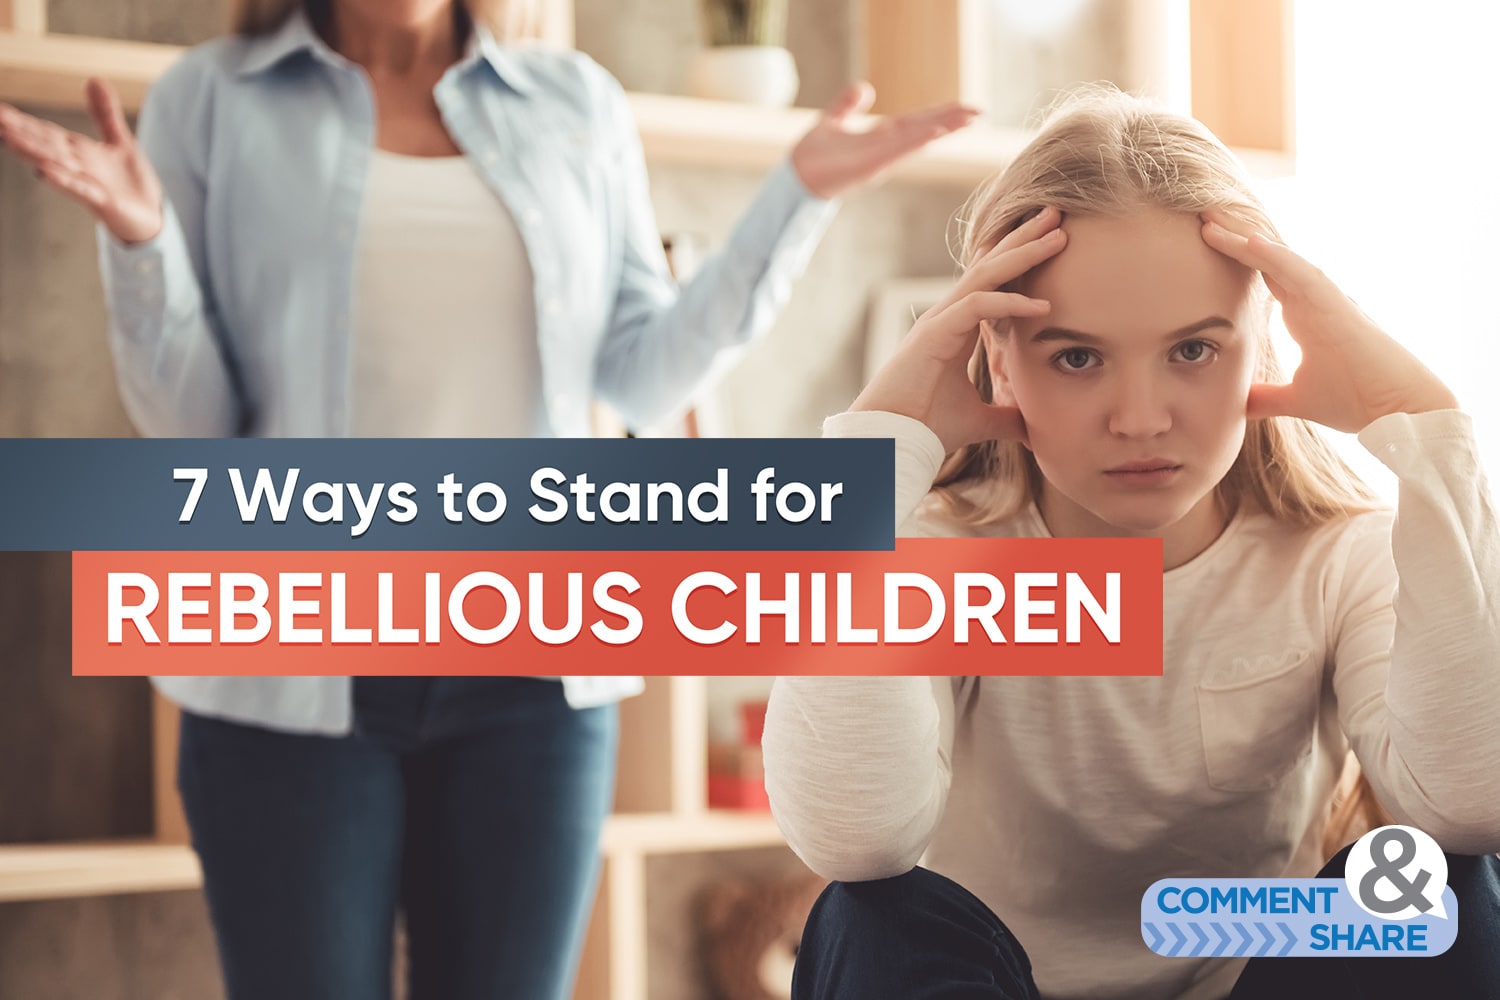 Ten Ways To Deal With A Stubborn Child